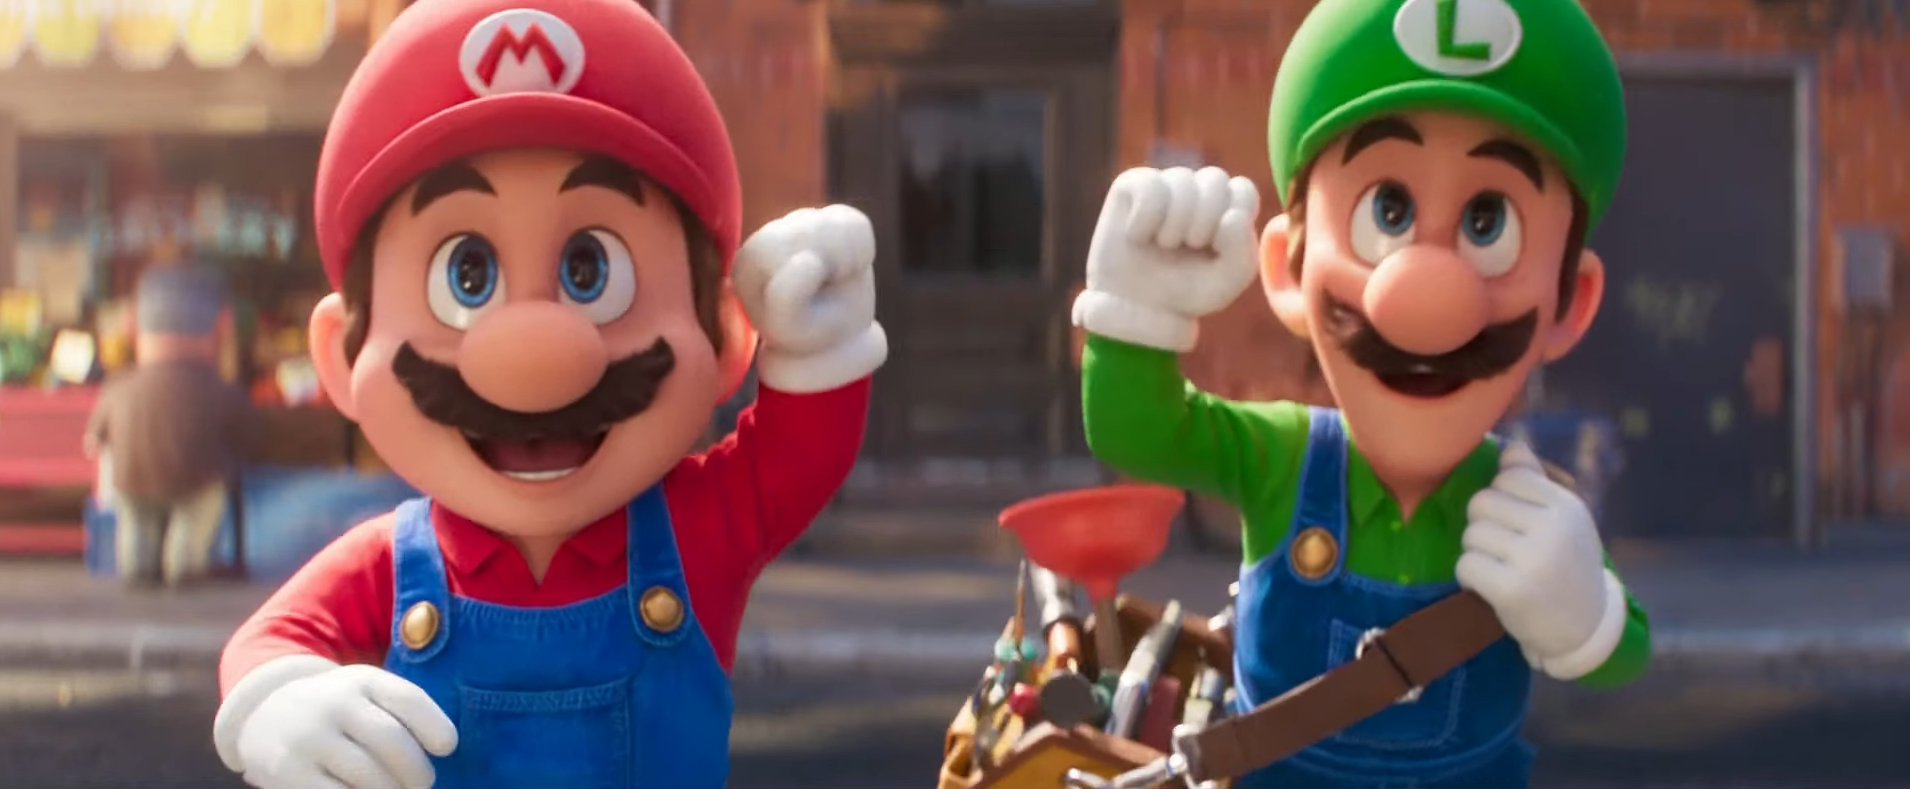 New Super Mario Bros. Movie trailer is filled with Easter eggs